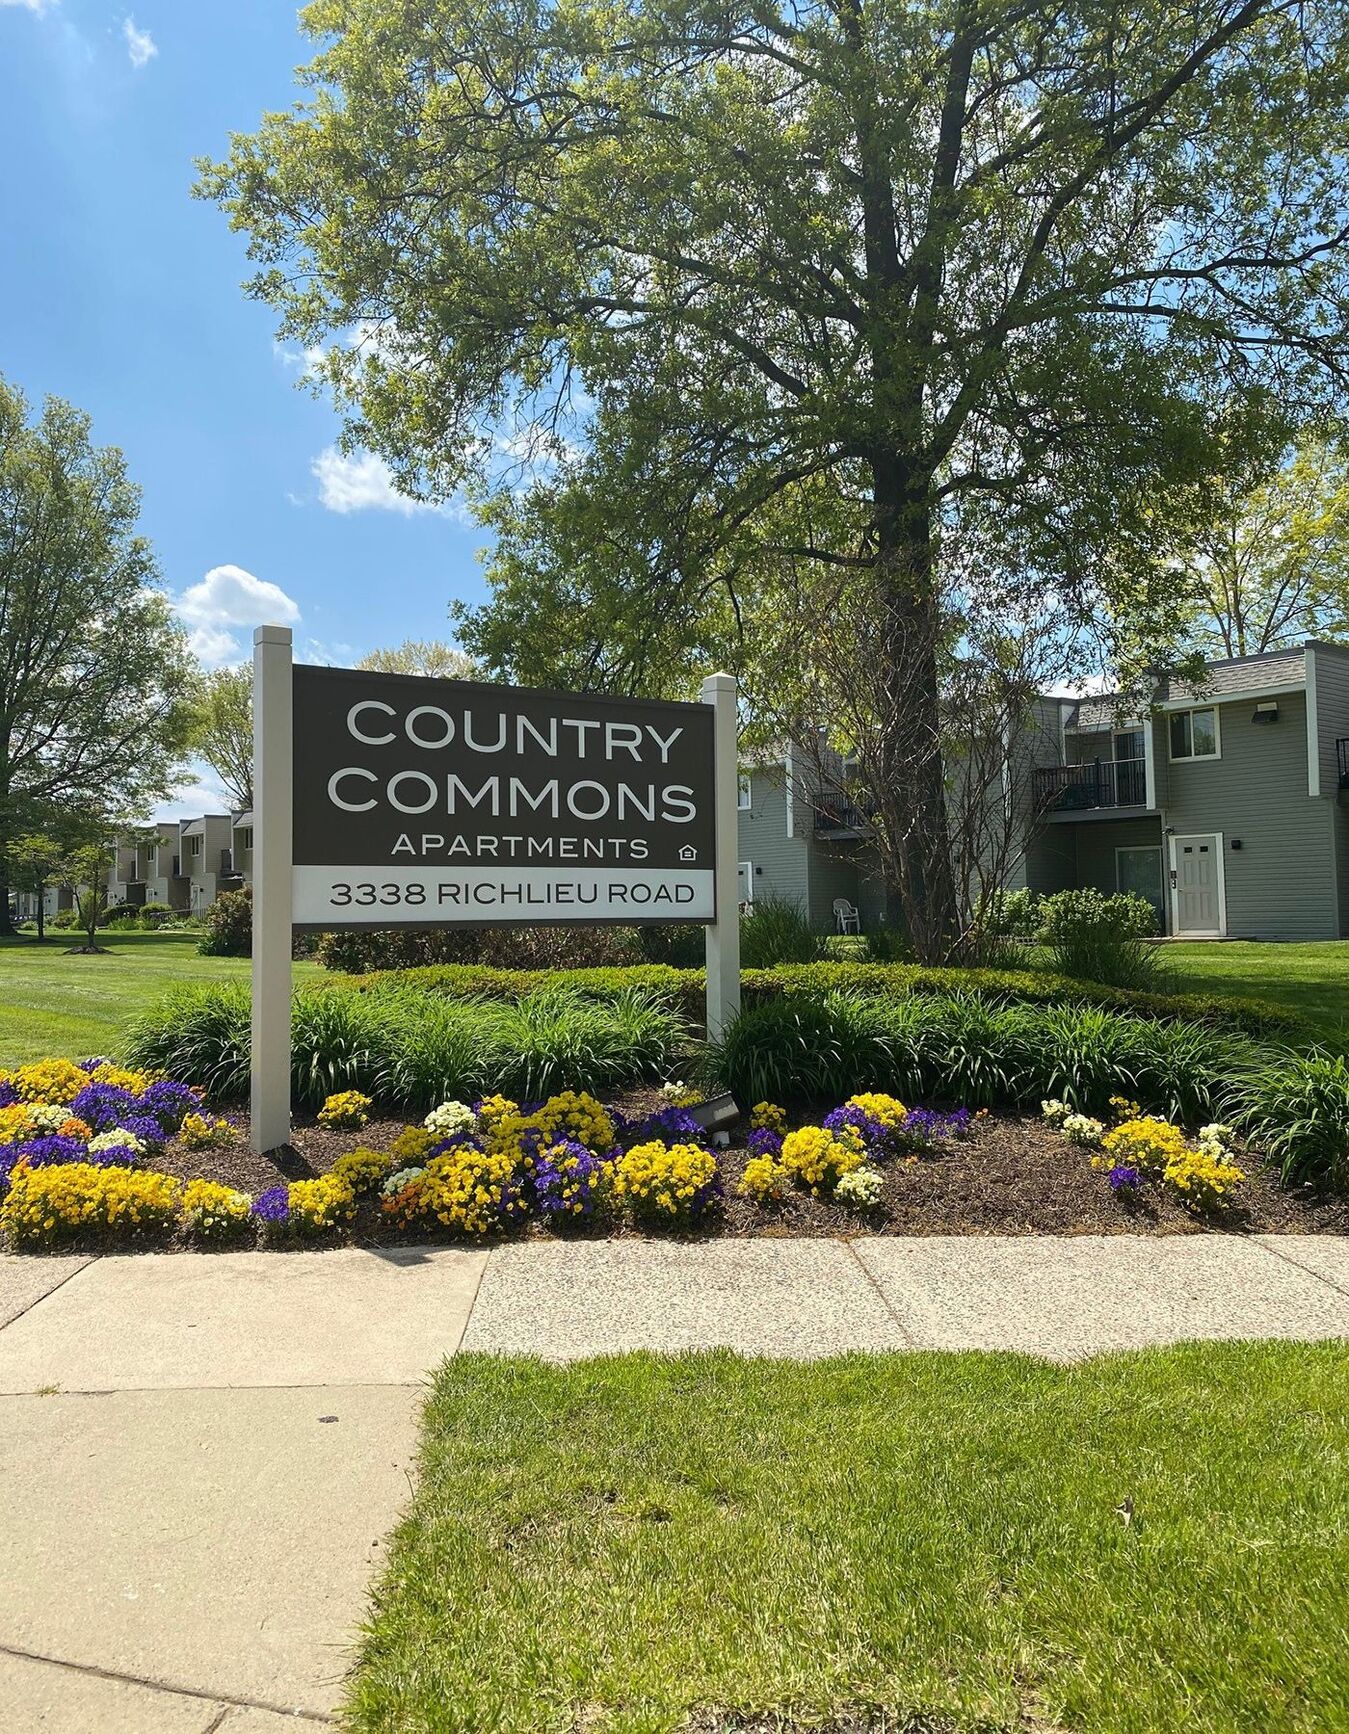 COUNTRY COMMONS